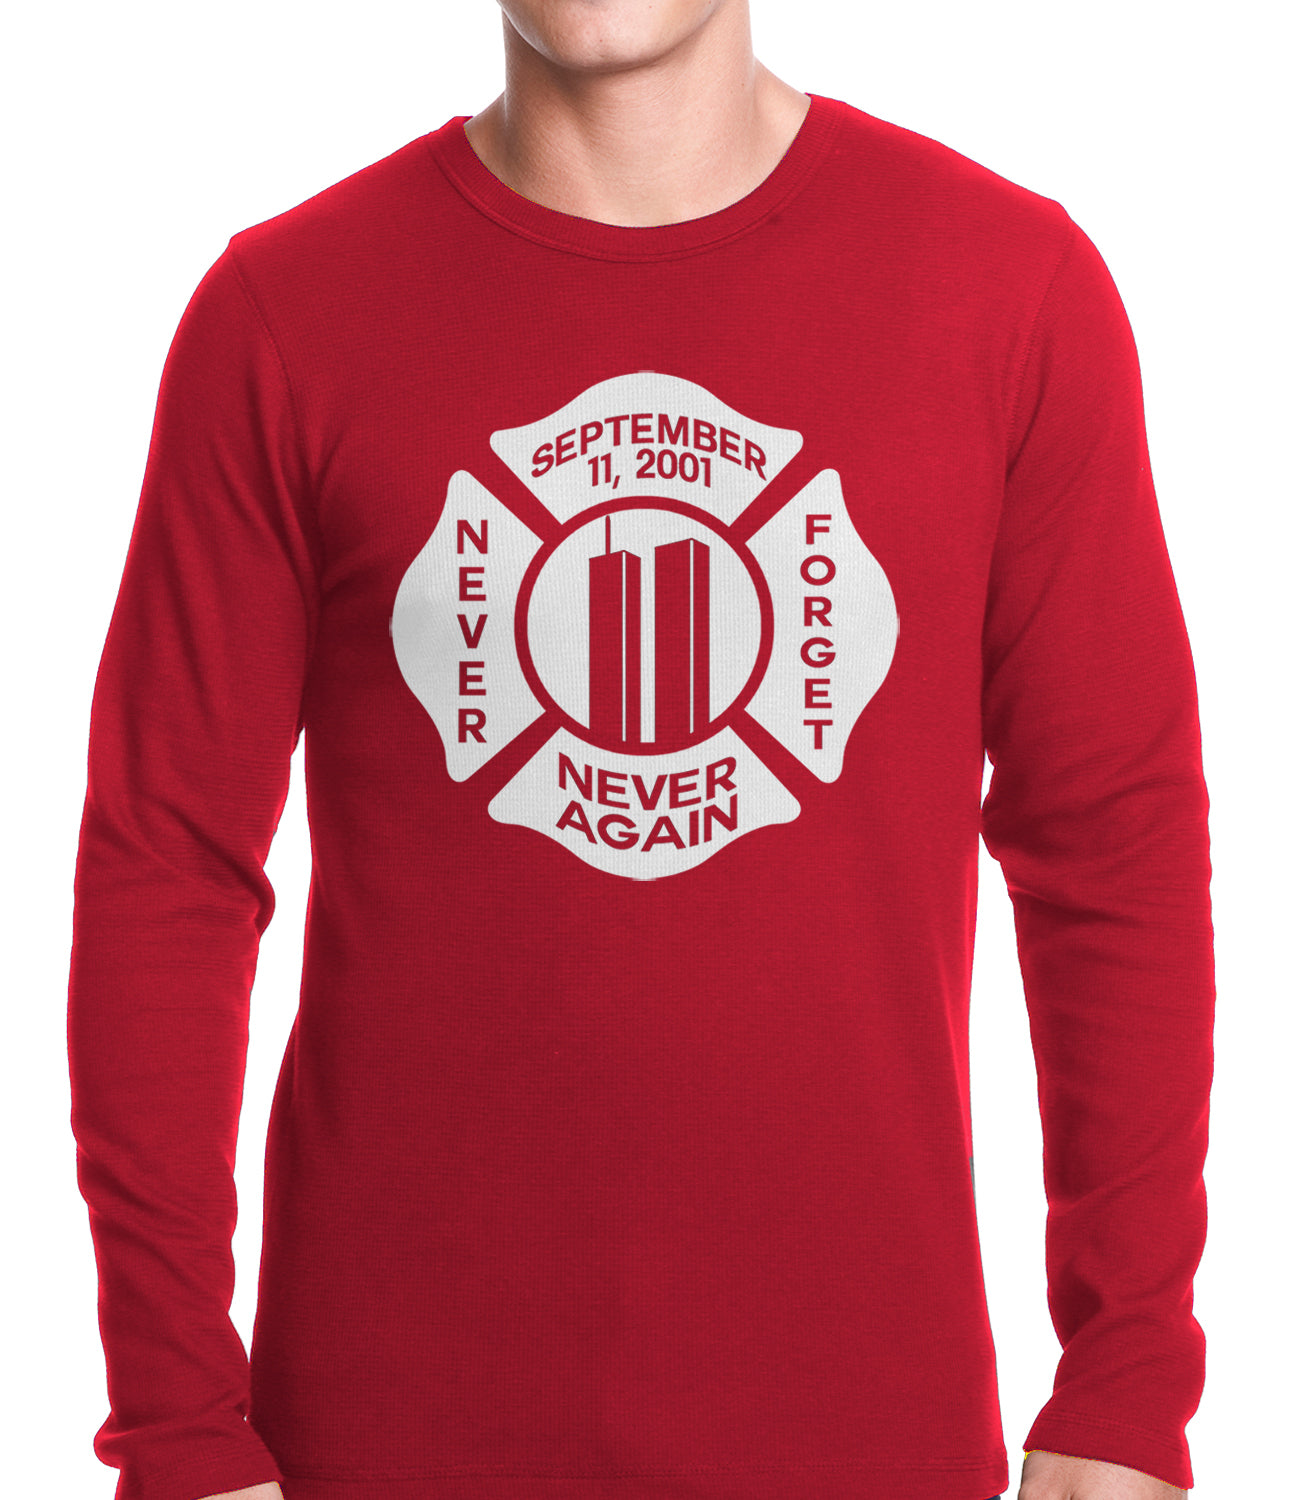 September 11, 2001 Never Forget, Never Again Thermal Shirt